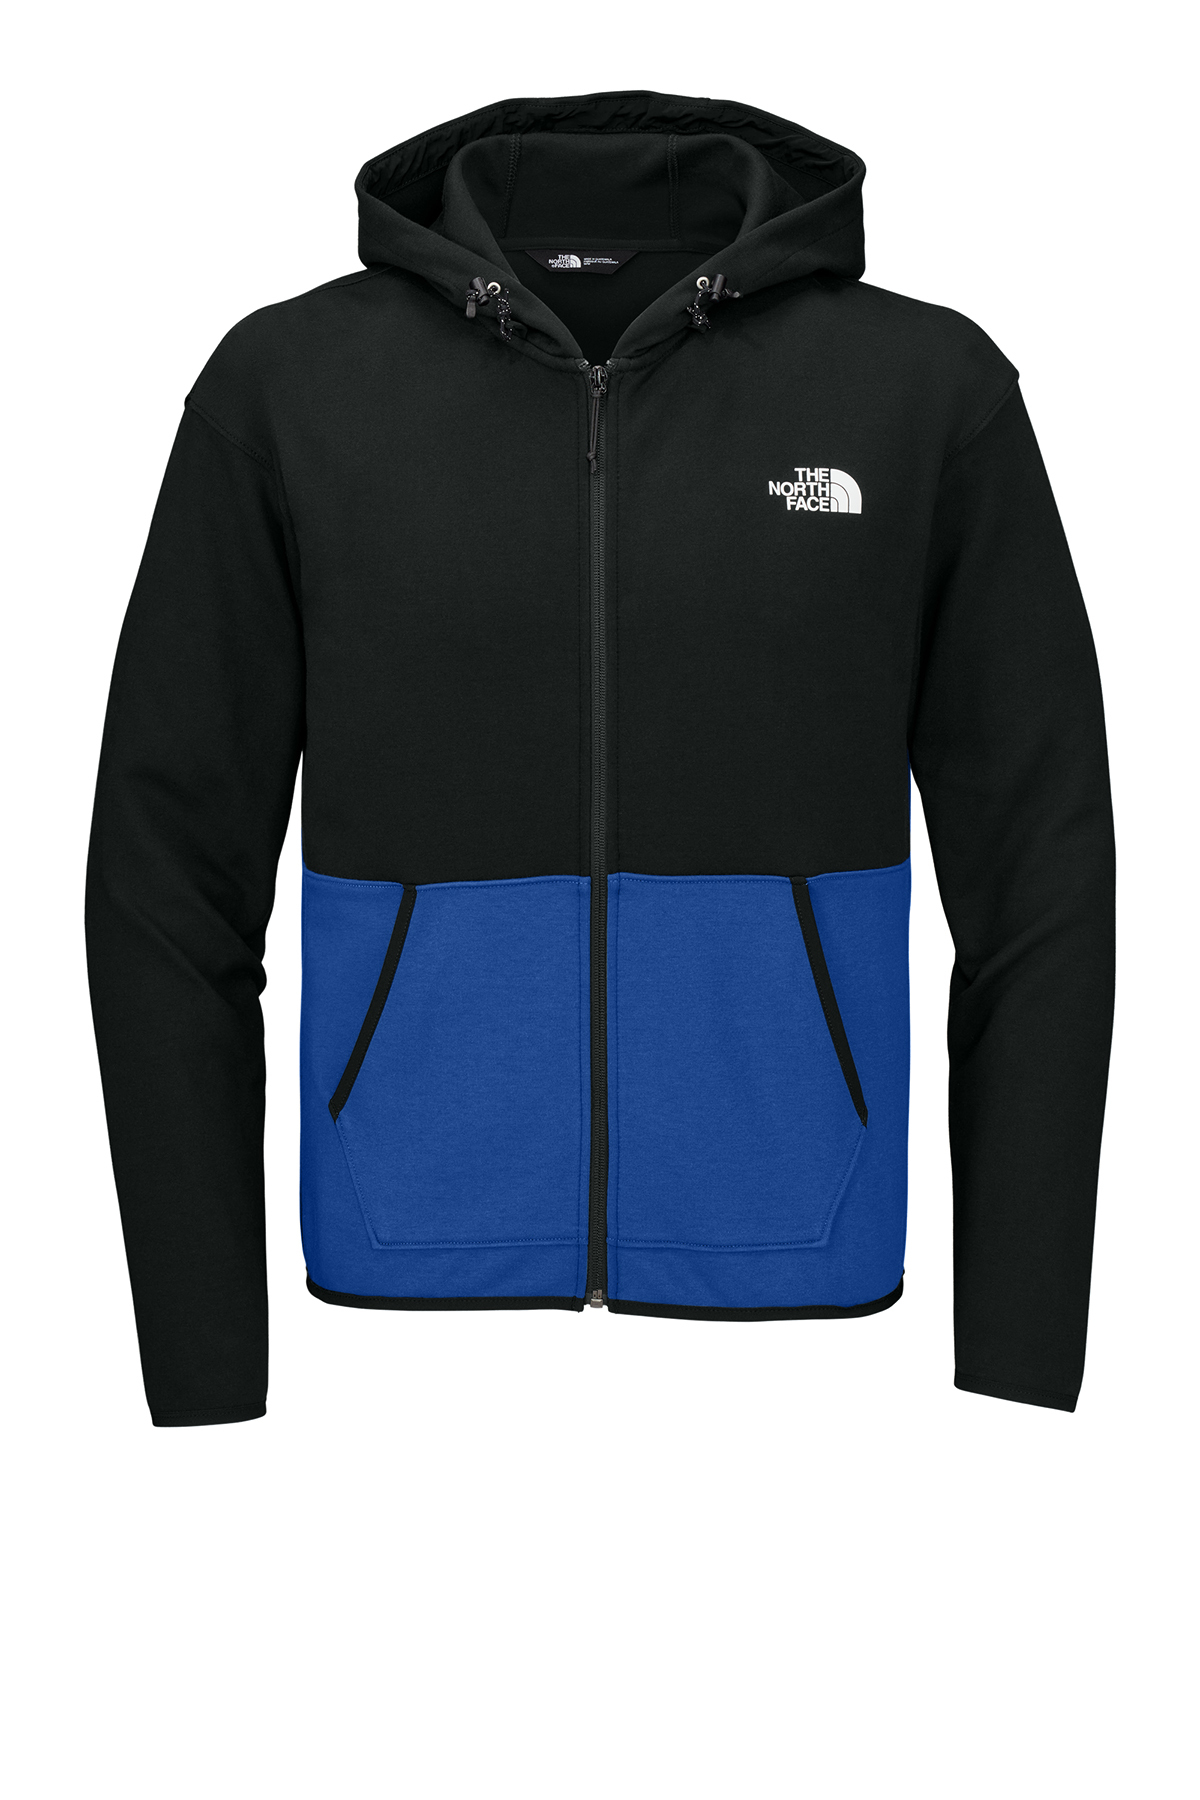 The North Face Double-Knit Full-Zip Hoodie | Product | SanMar